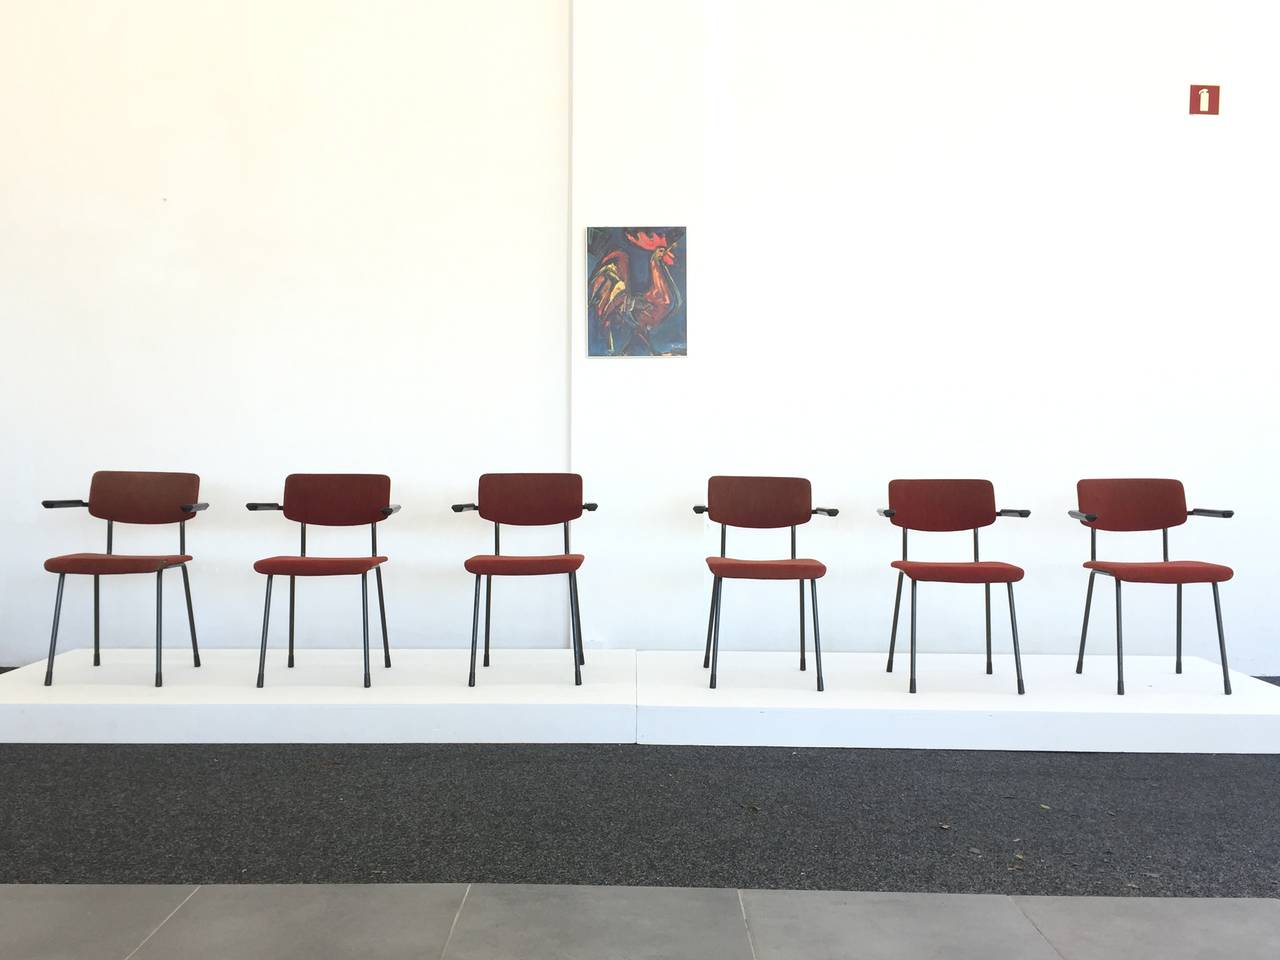 Mid-20th Century Big Lot Gispen 1236 Armchairs Produced in 1960 for a Dutch University